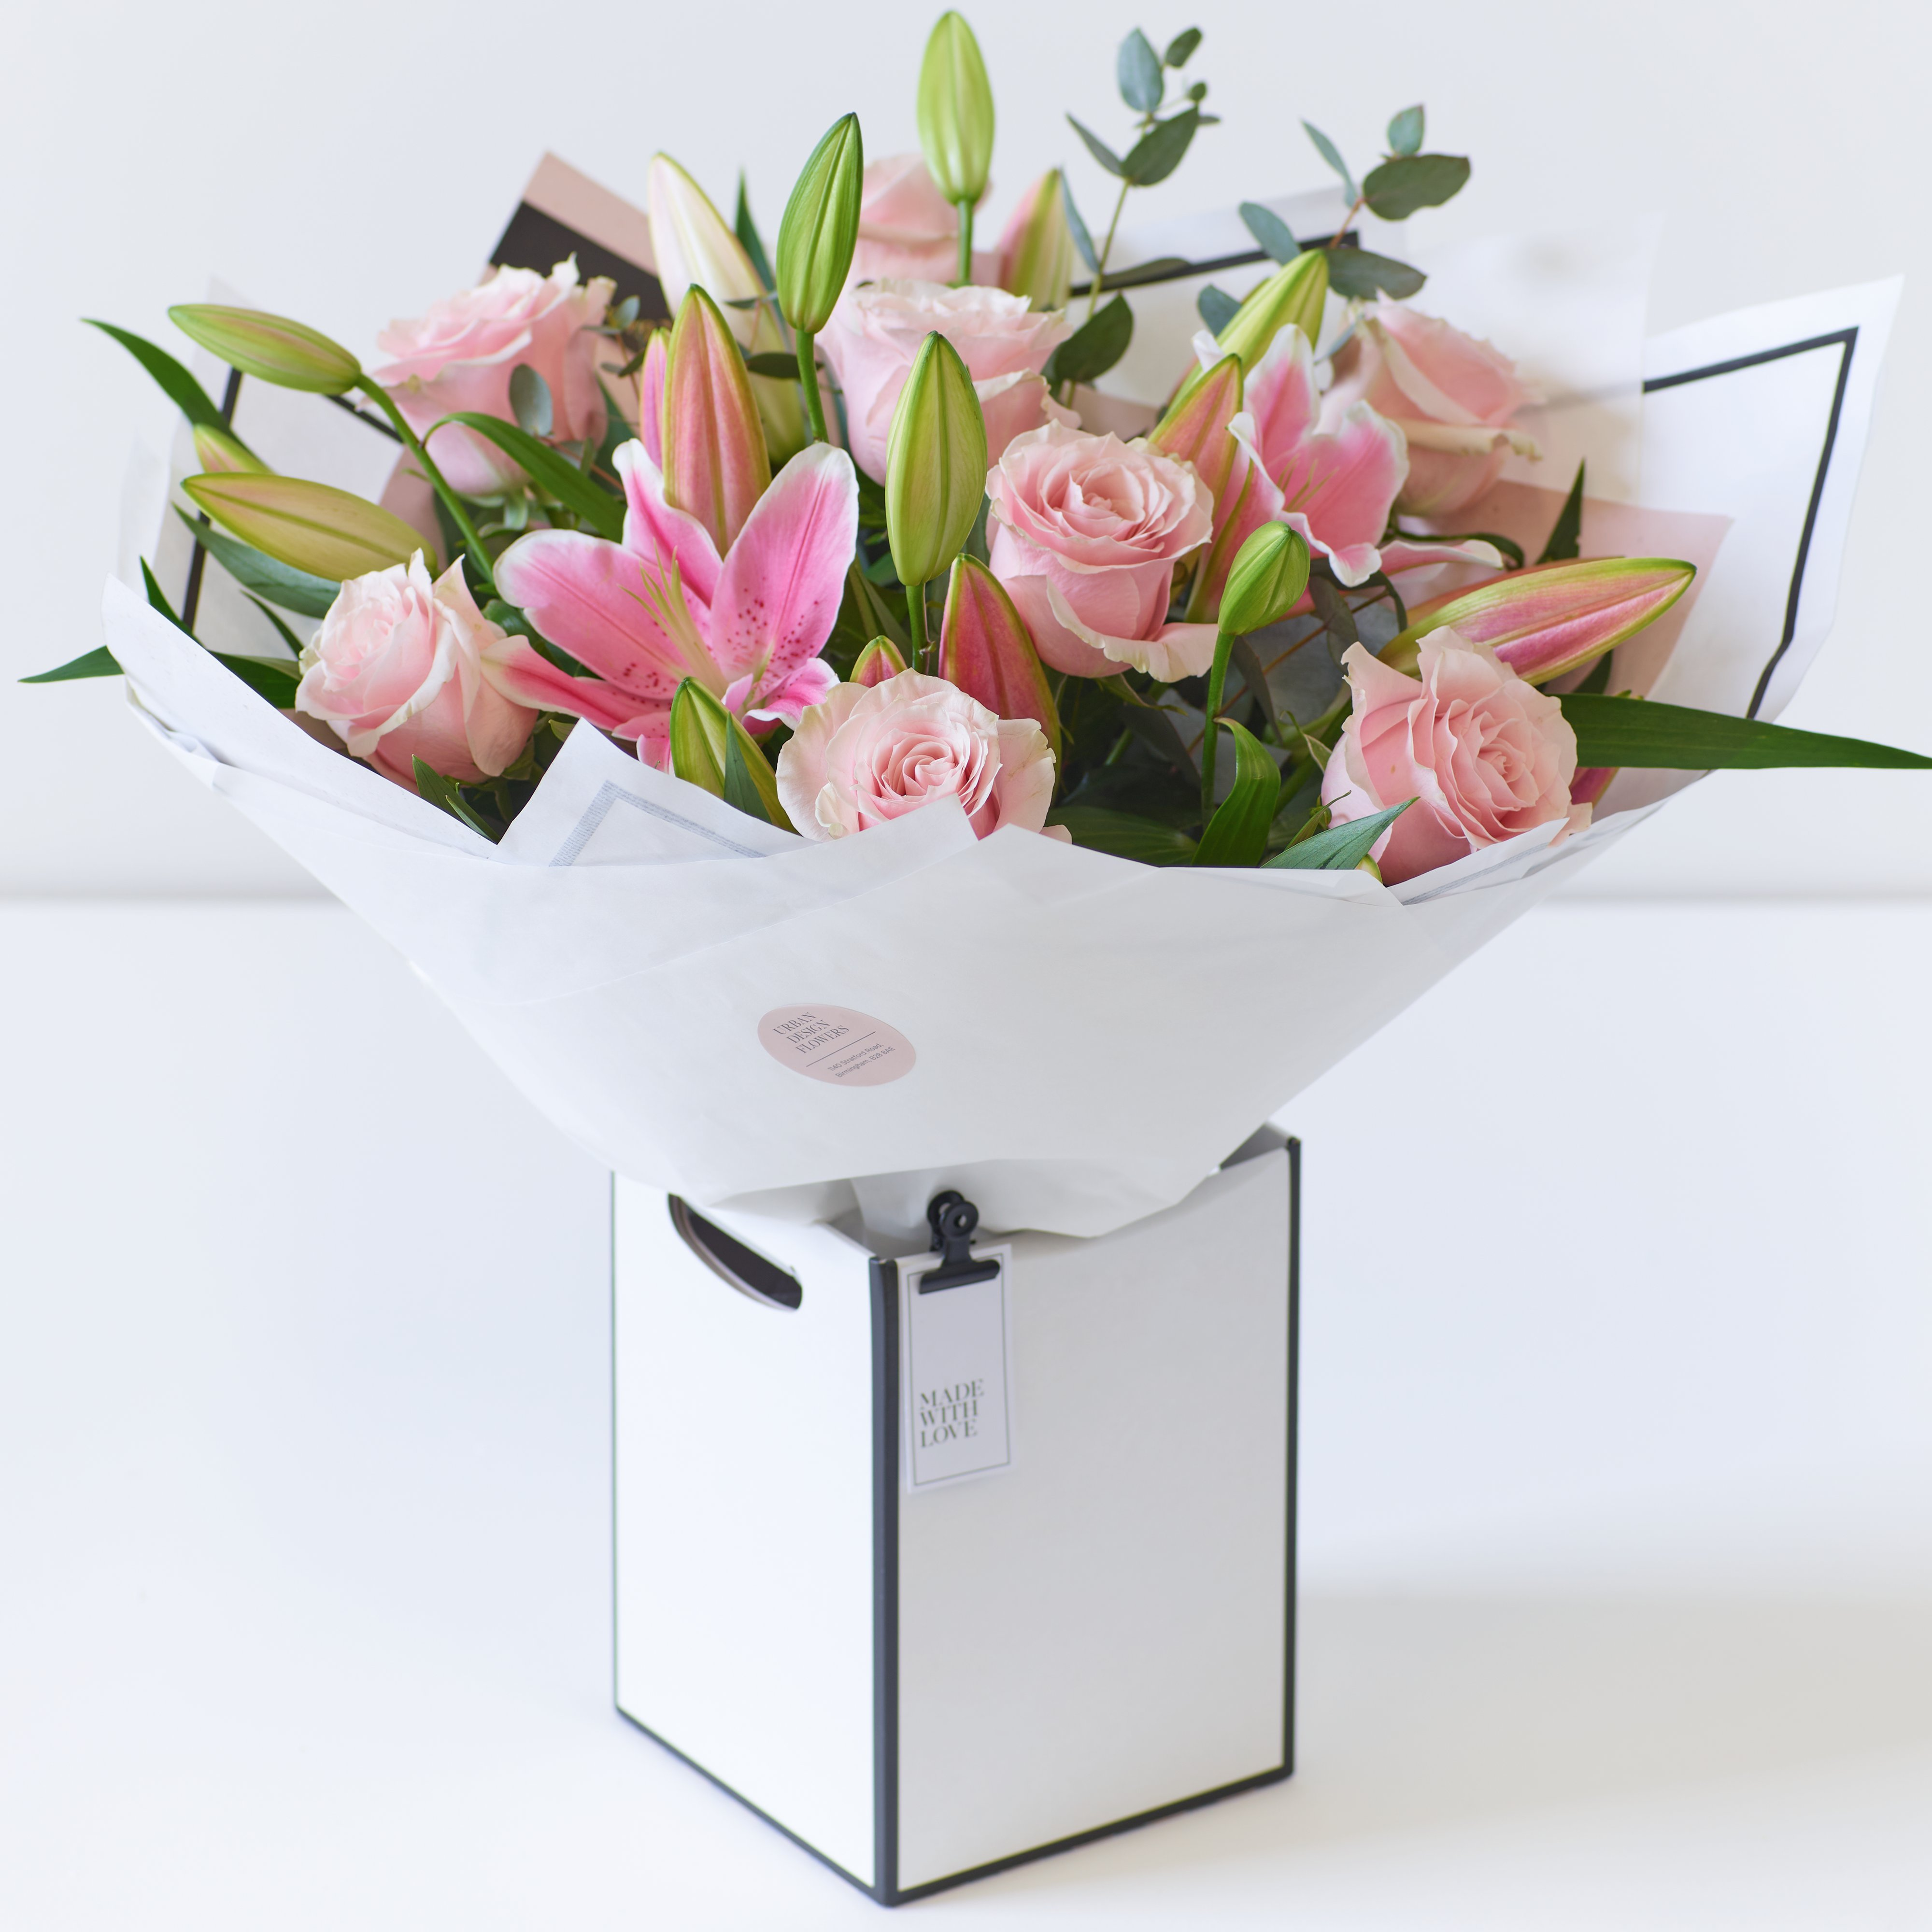 Luxury Pink Rose and Lily Bouquet image